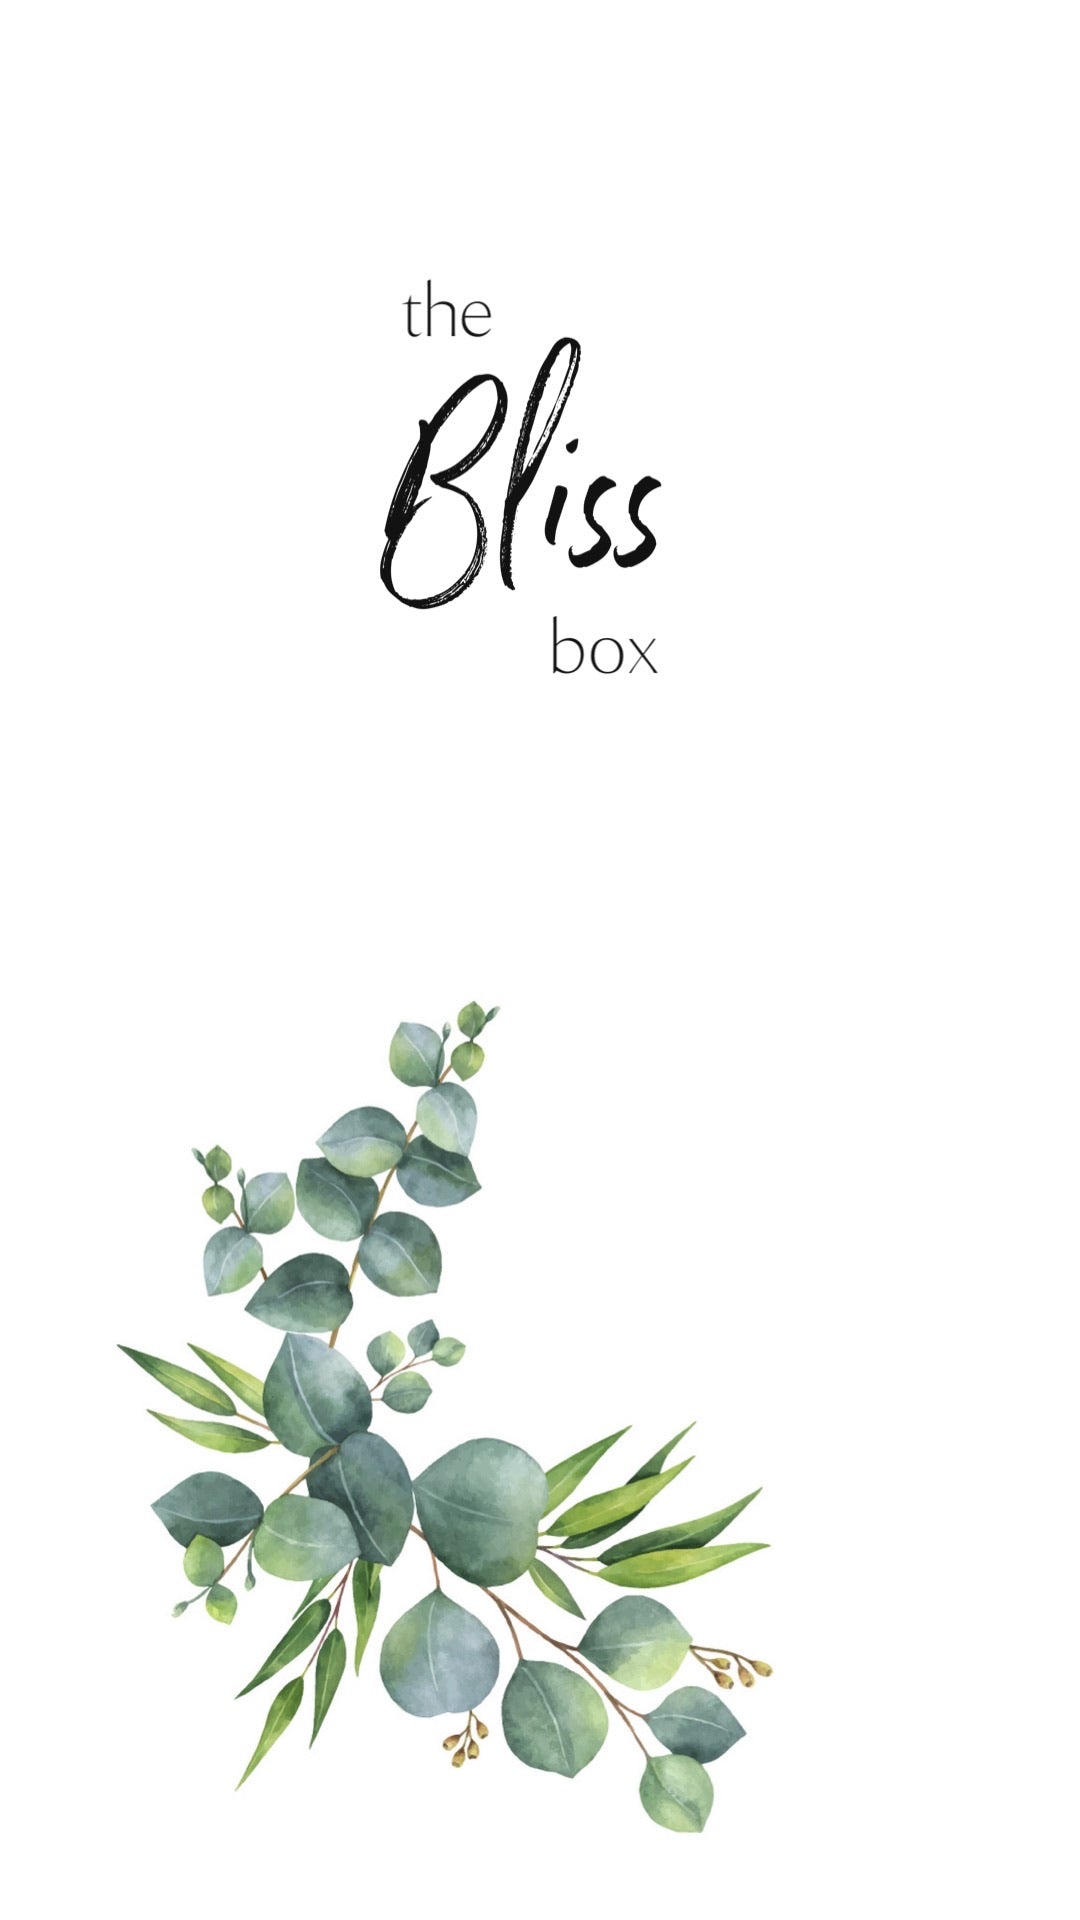 Find Your BLISS - Subscription Box Adventures